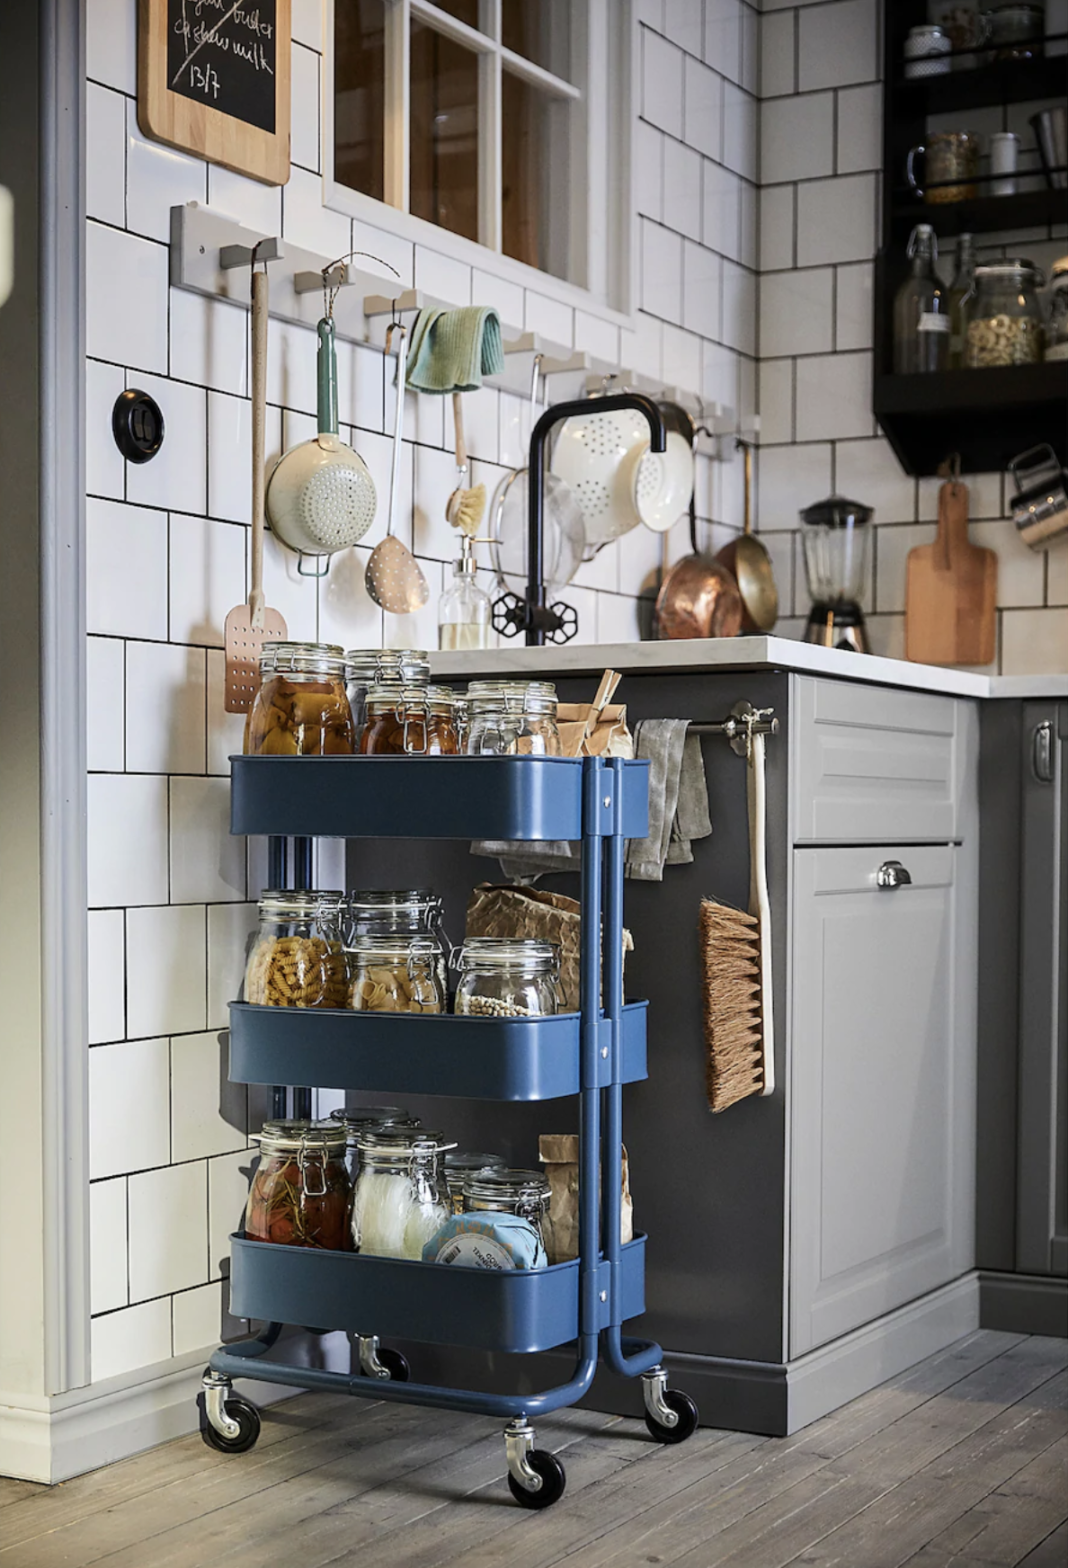 8 Ikea kitchen storage ideas that will instantly declutter your space